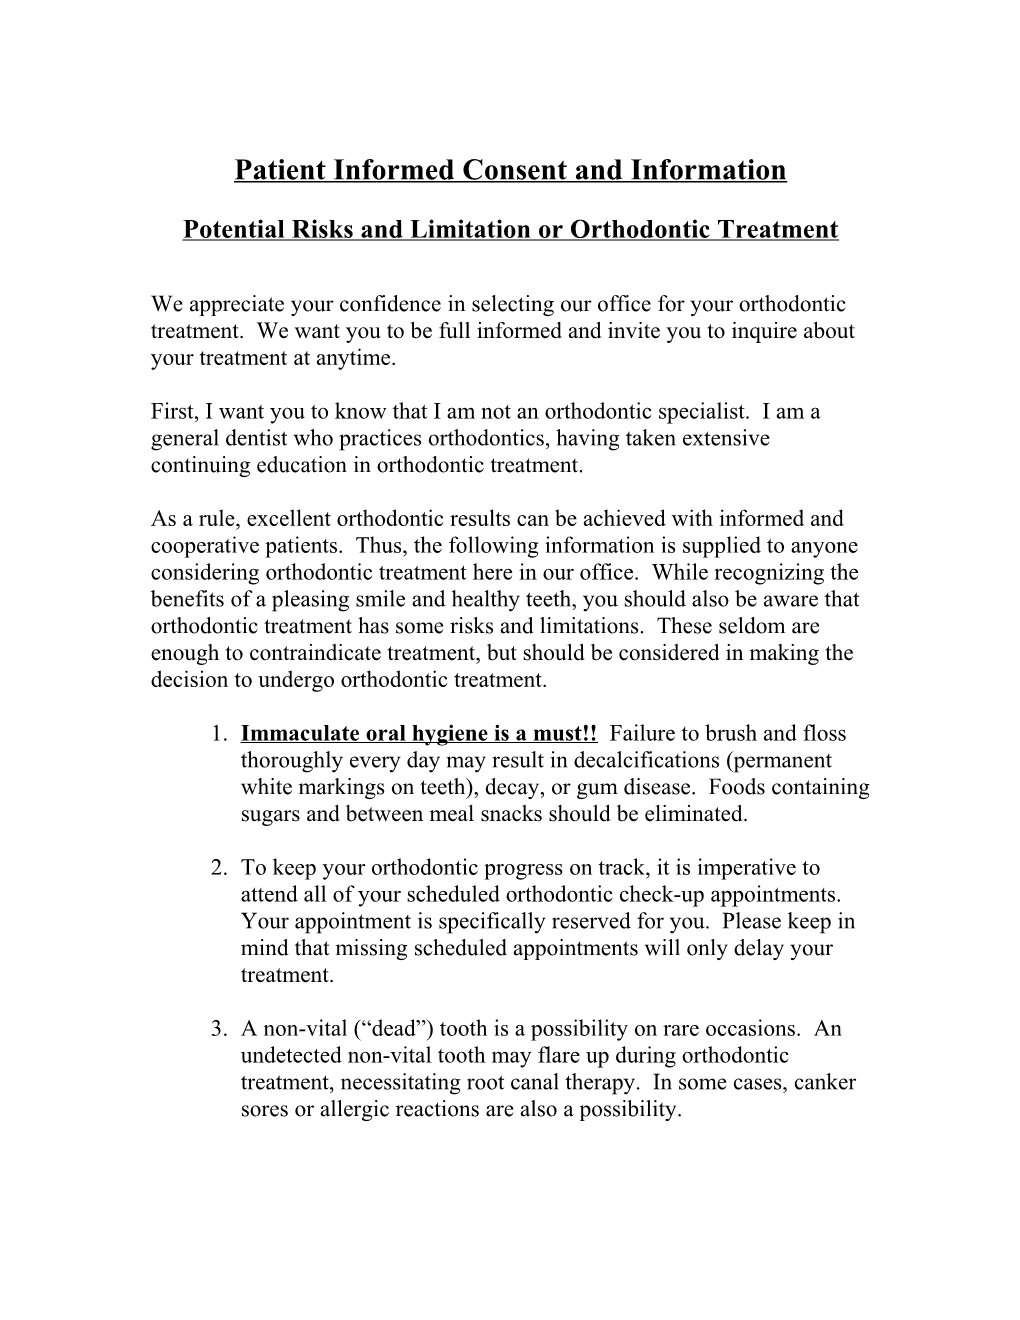 Patient Informed Consent and Information